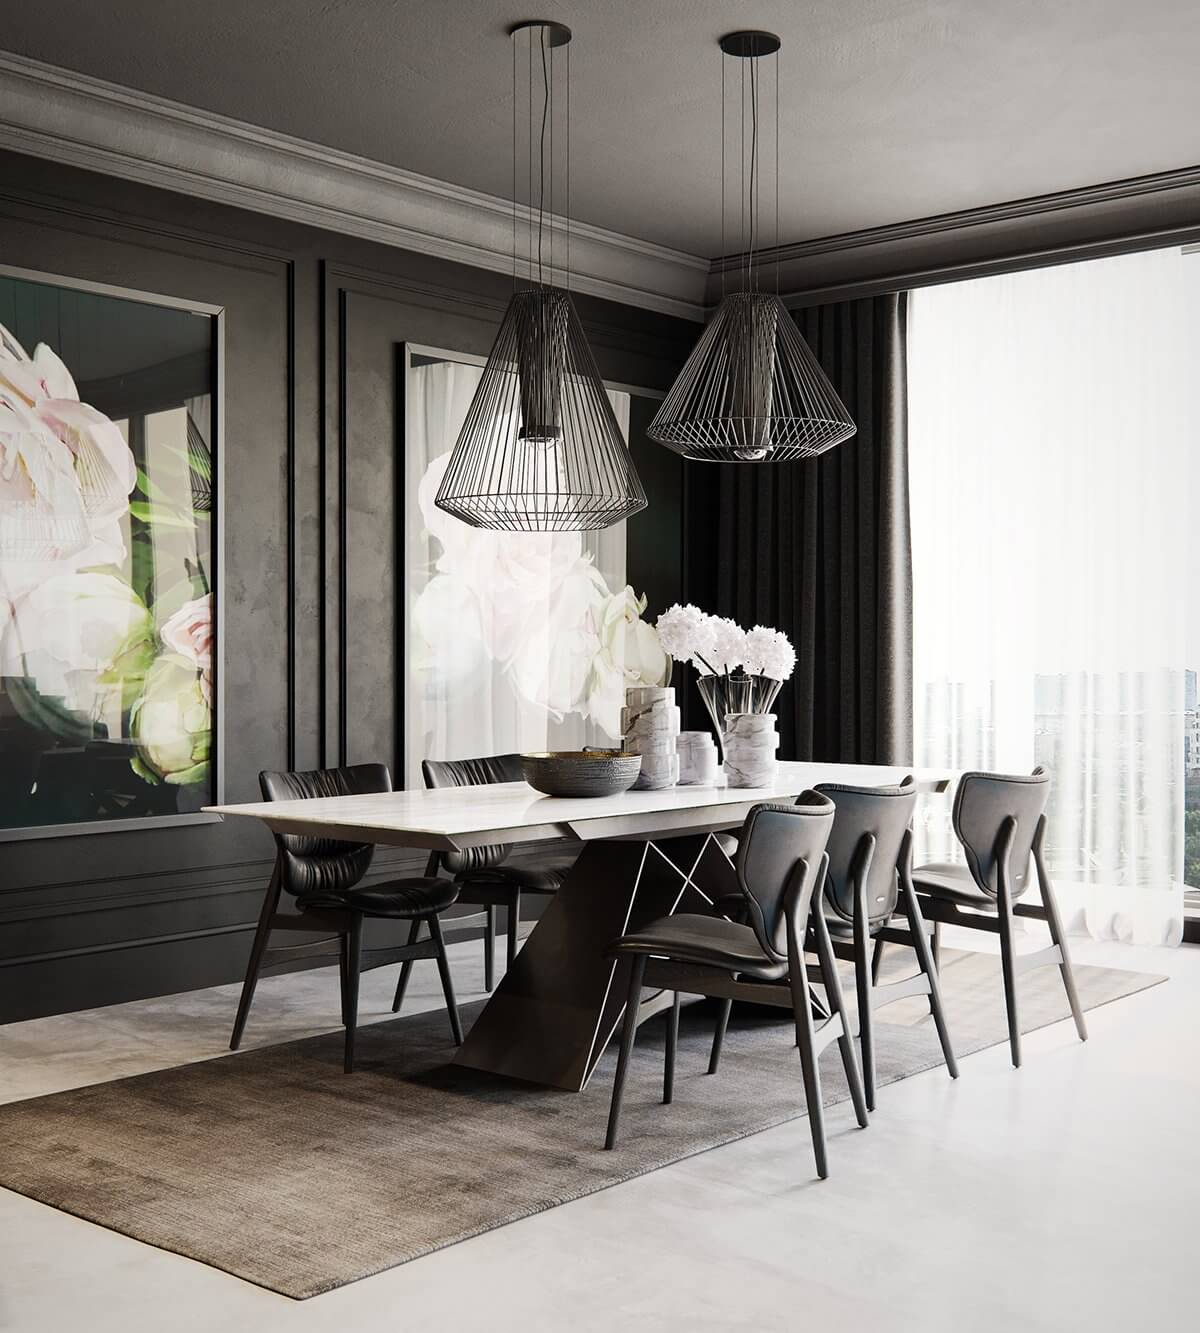 Moscow apartment kitchen dining room table - cgi visualization